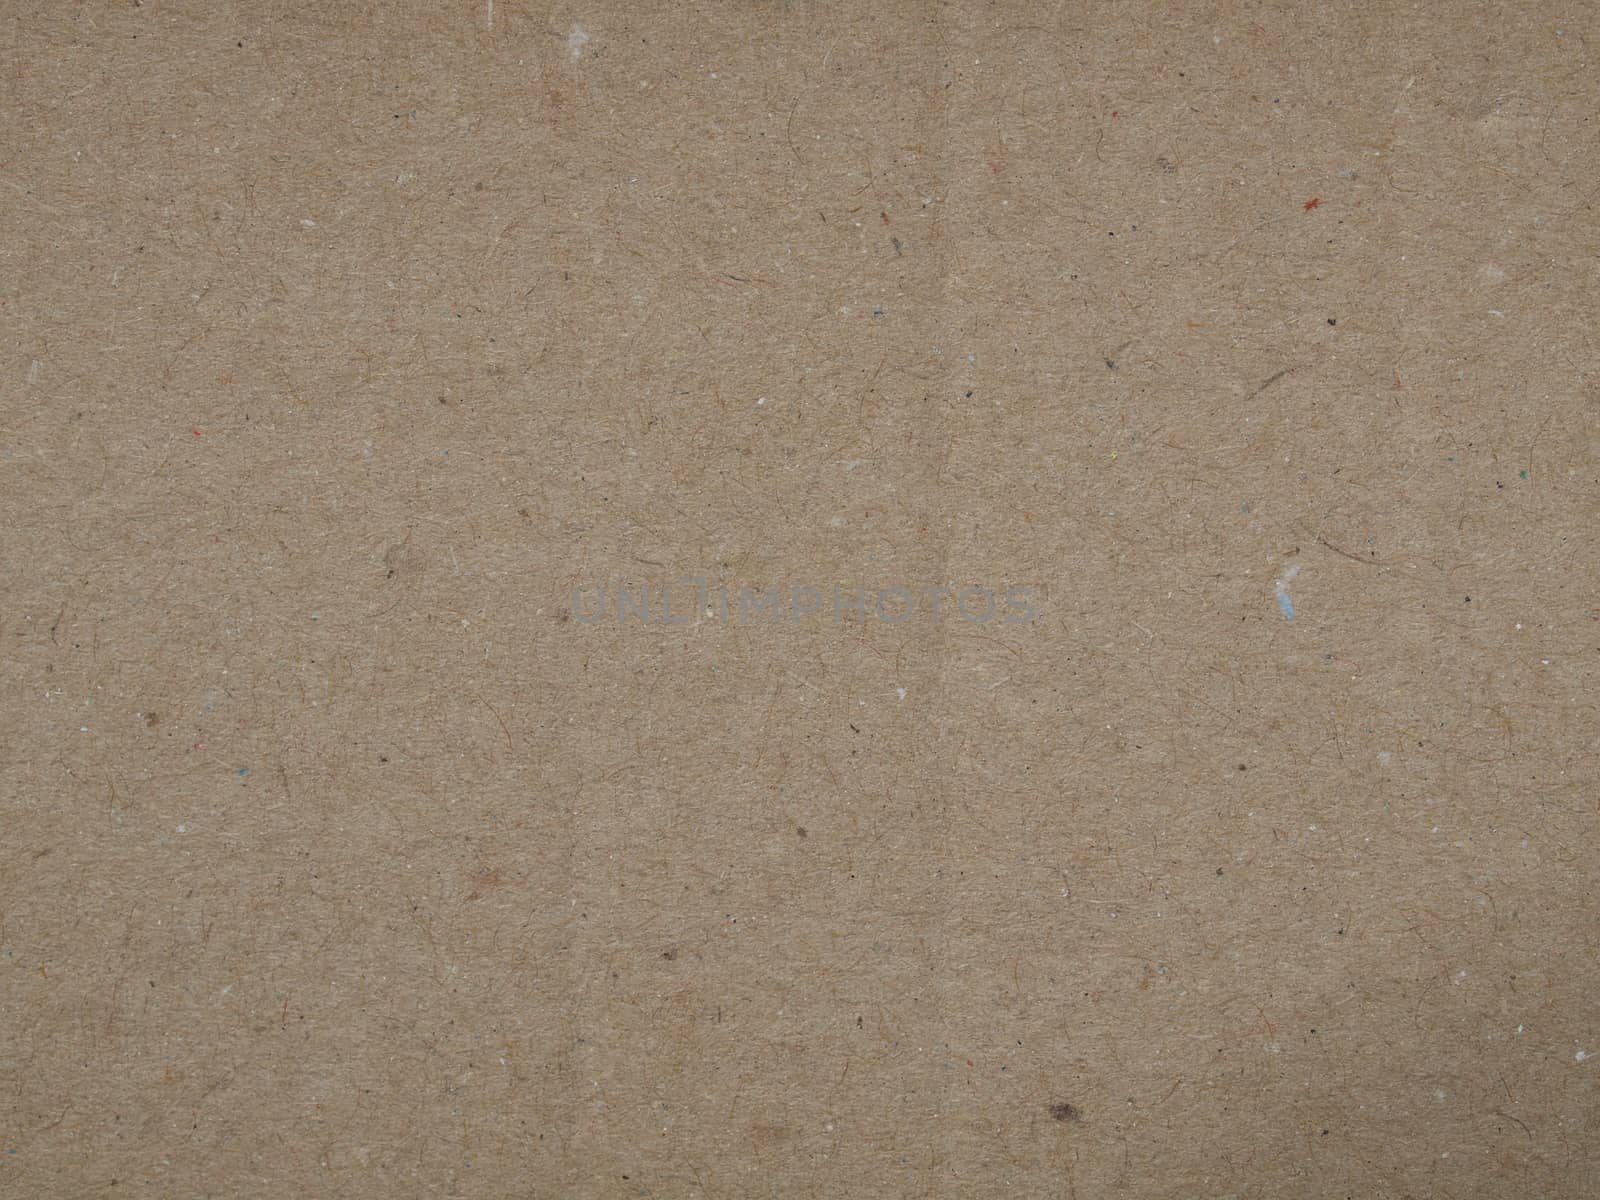 Old brown paper background by paolo77